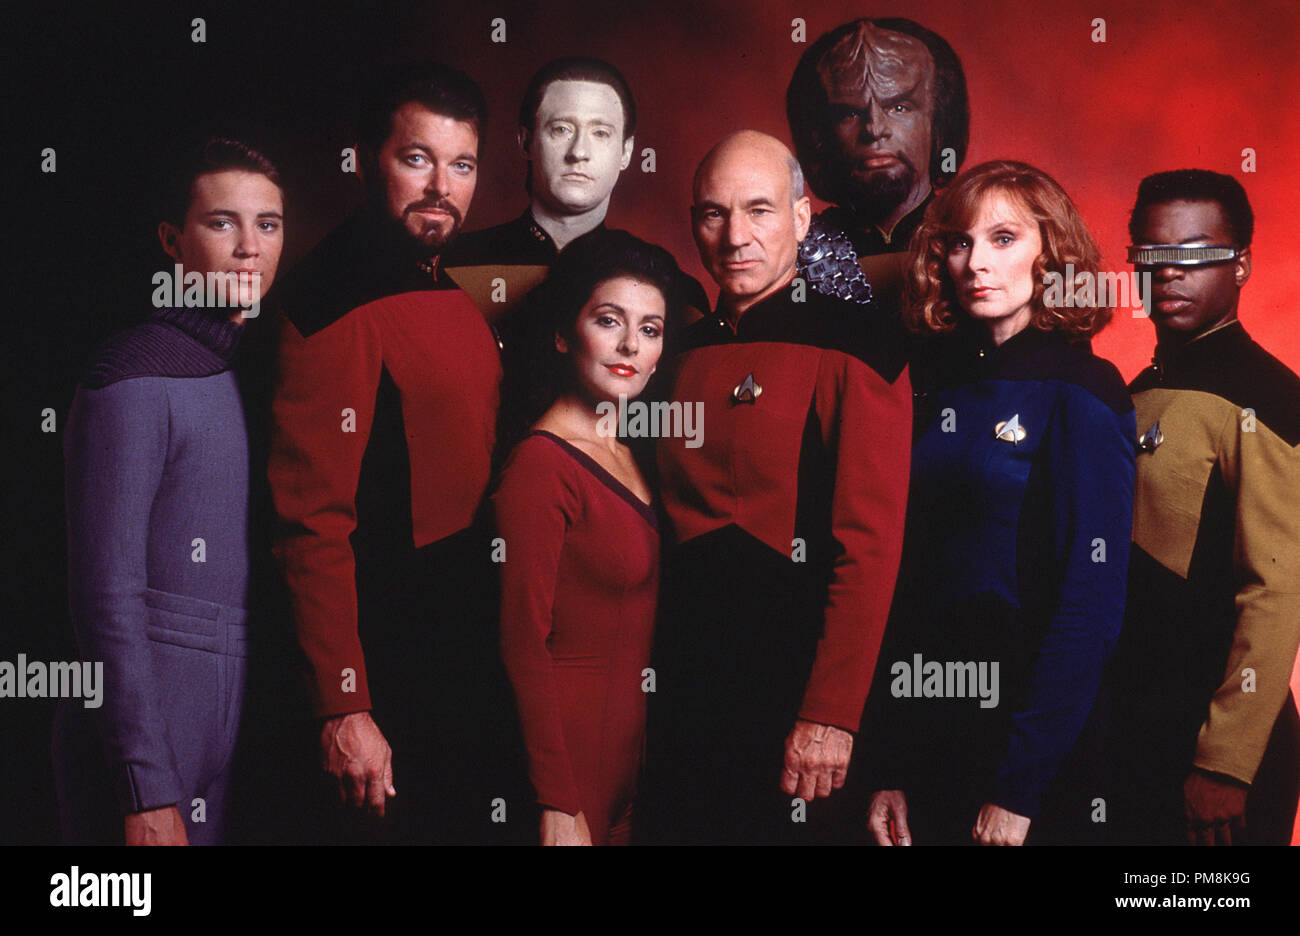 Film still or Publicity still from 'Star Trek: Next Generation' Will Wheaton, Brent Spiner, Jonathan Frakes, Levar Burton, Patrick Stewart, Marina Sirtis, Michael Dorn and Gates McFadden, circa 1989 All Rights Reserved   File Reference # 31623057THA  For Editorial Use Only Stock Photo